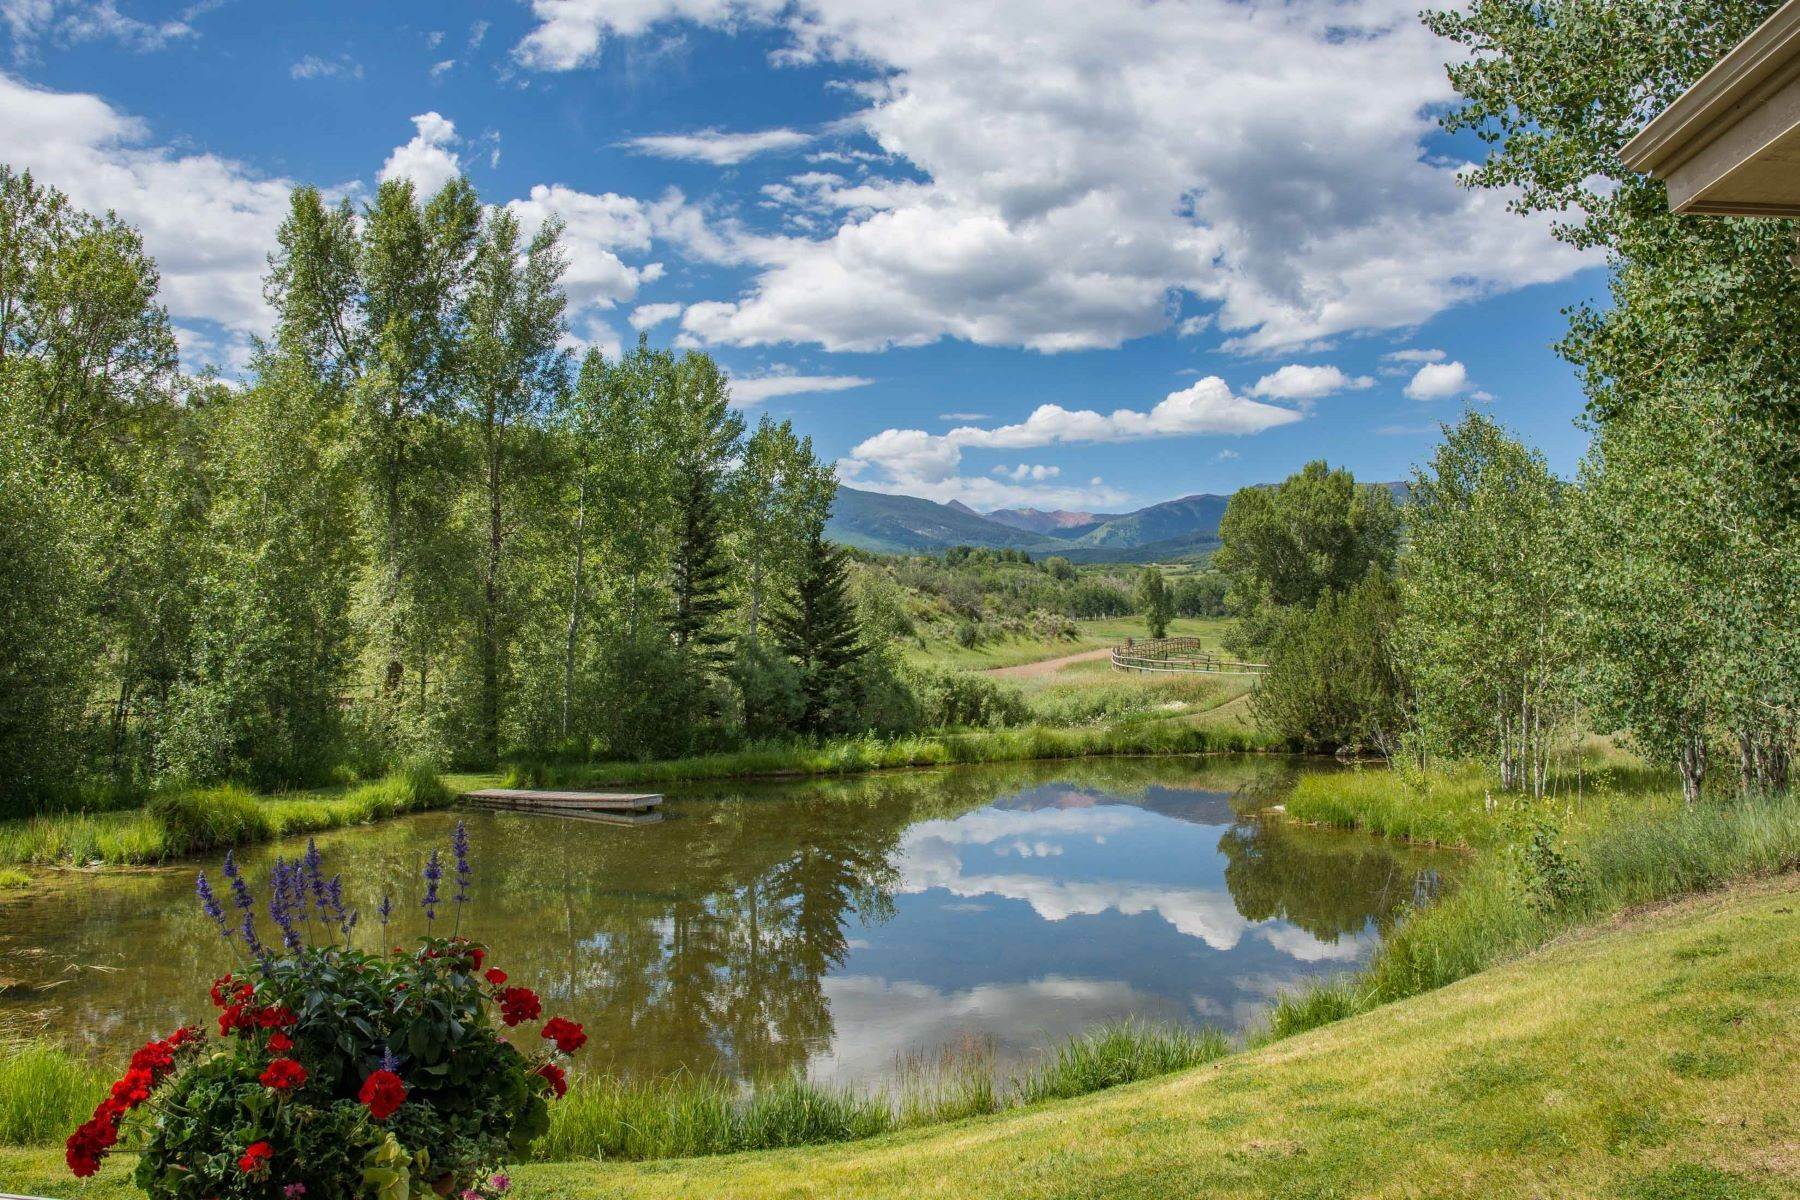 Farm and Ranch Properties 為 出售 在 RARE and UNIQUE opportunity to own the heart of the renowned McCabe Ranch! 1321 Elk Creek & TBD McCabe Ranch, Old Snowmass, 科羅拉多州 81654 美國